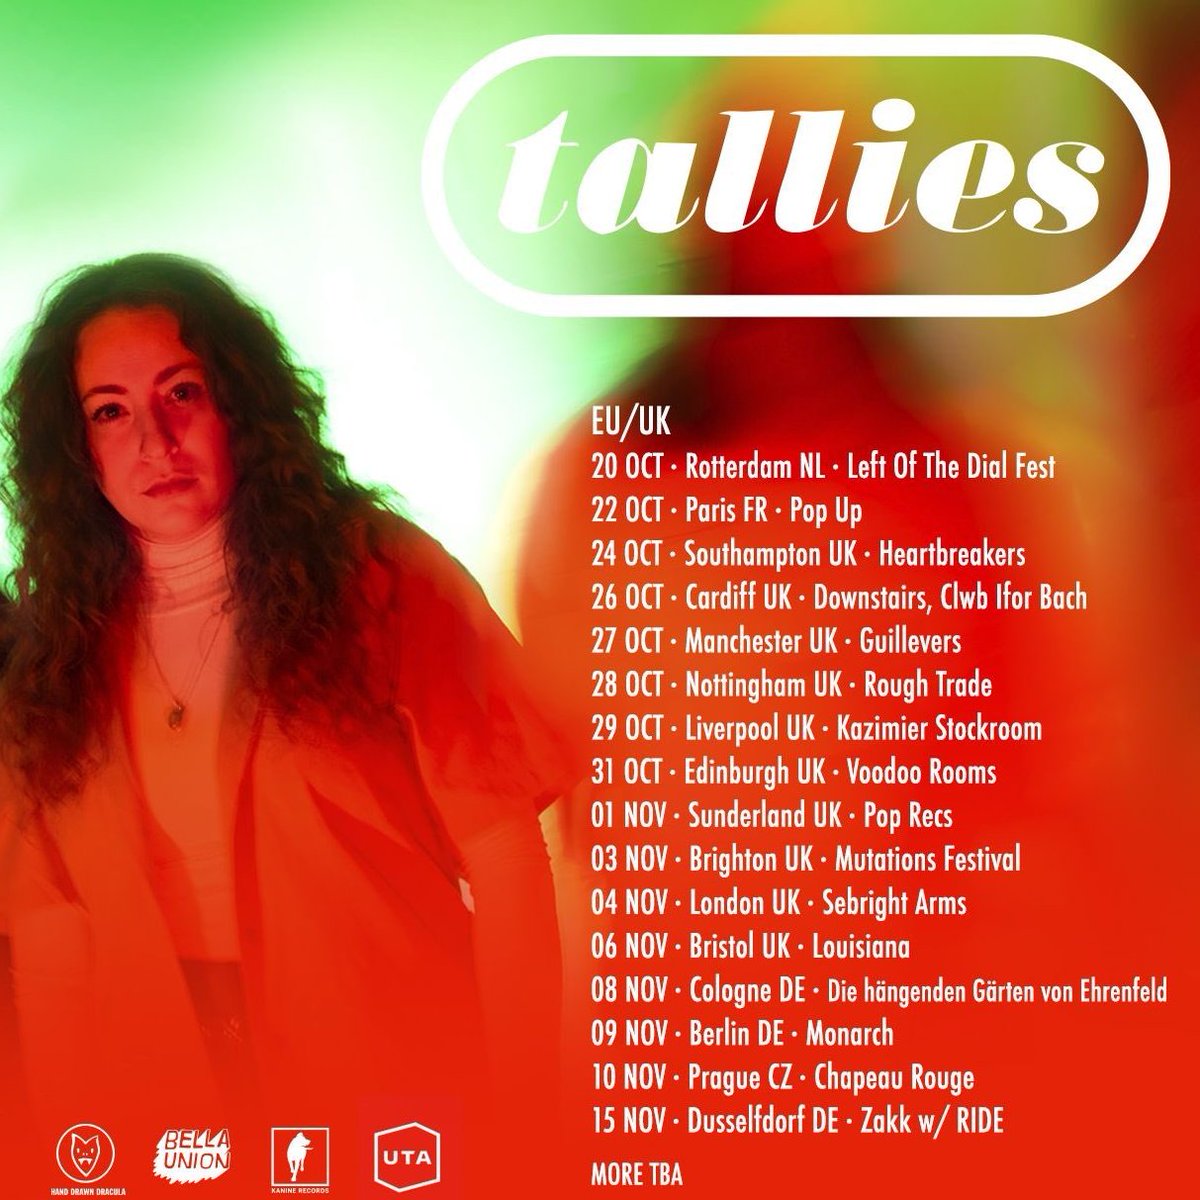 Had a great night opening for the wonderful @TALLIESband. Thanks to everyone who came out, and to @poprecsltd for putting it on. Really enjoyed seeing Lots Of Hands too. Still a few remaining England dates for Tallies ... catch them if you can.